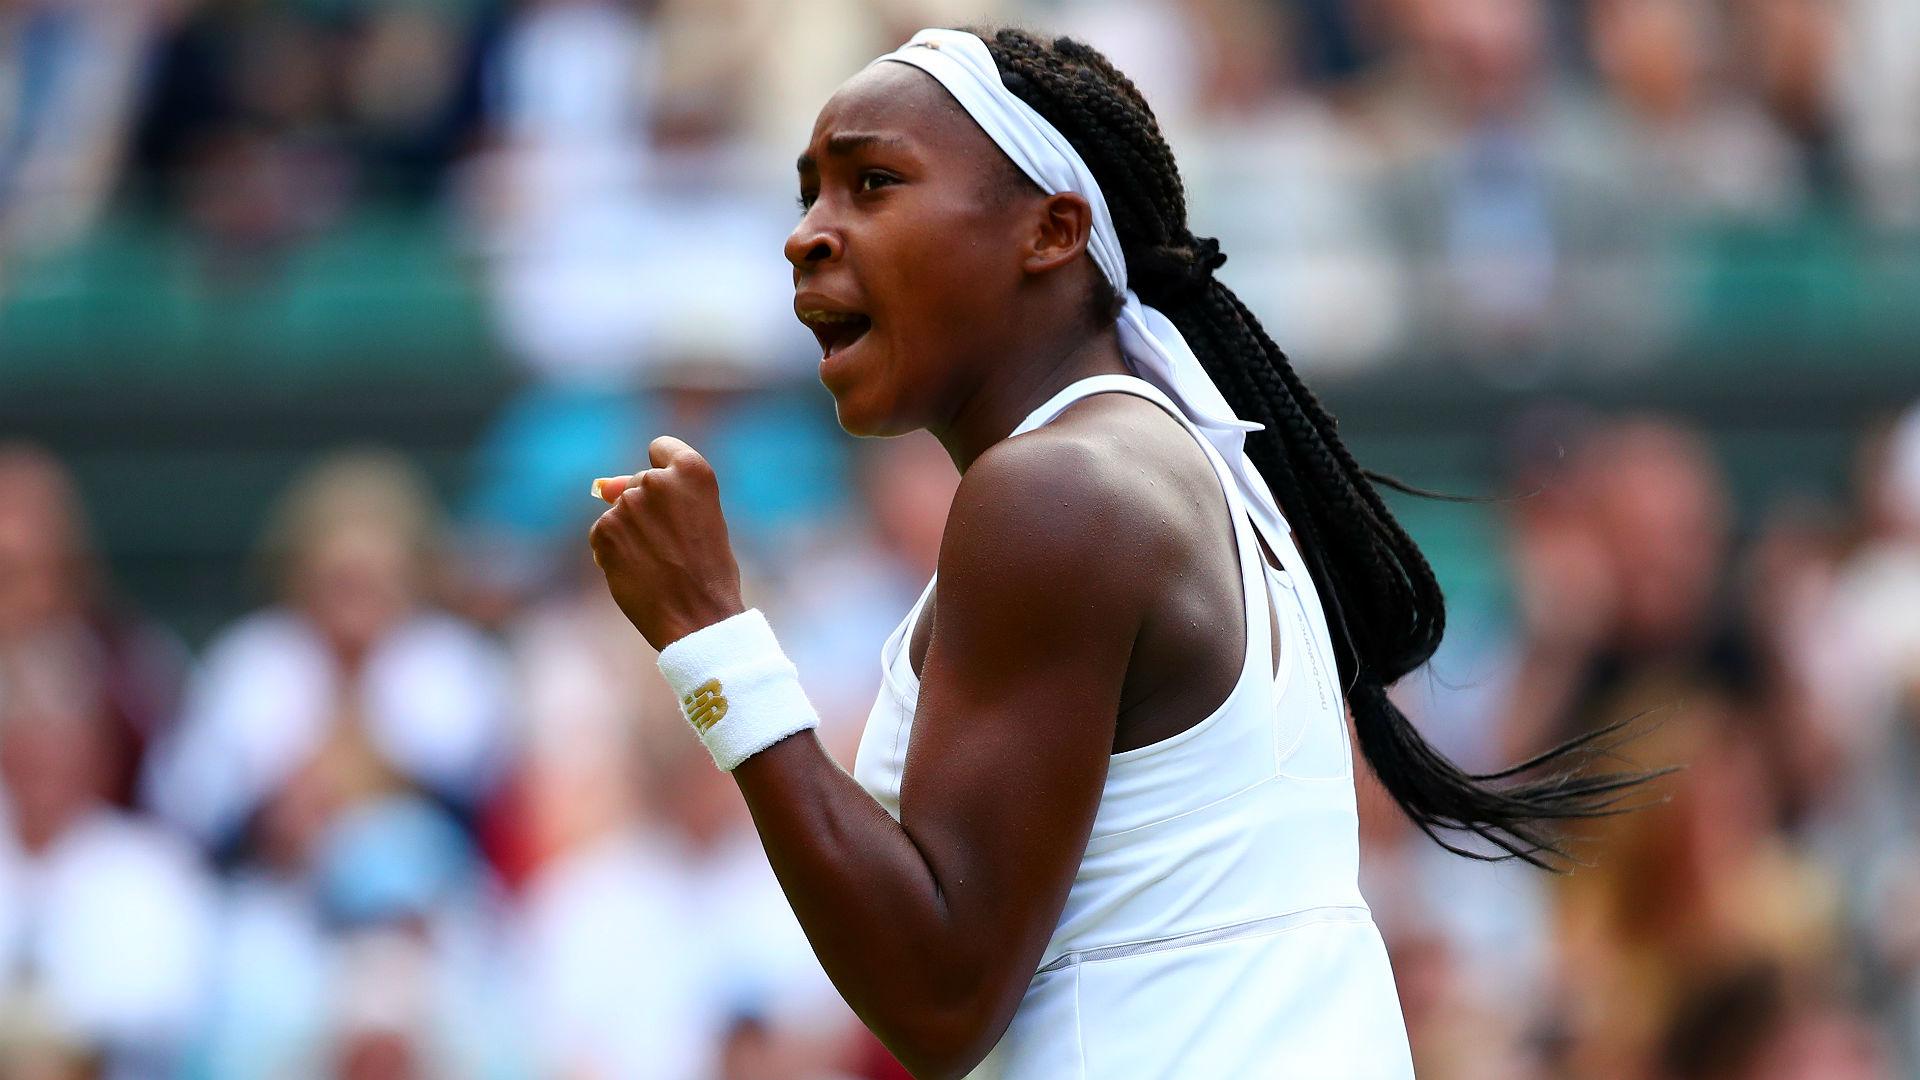 things to know about Cori 'CoCo' Gauff, the teen who beat Venus